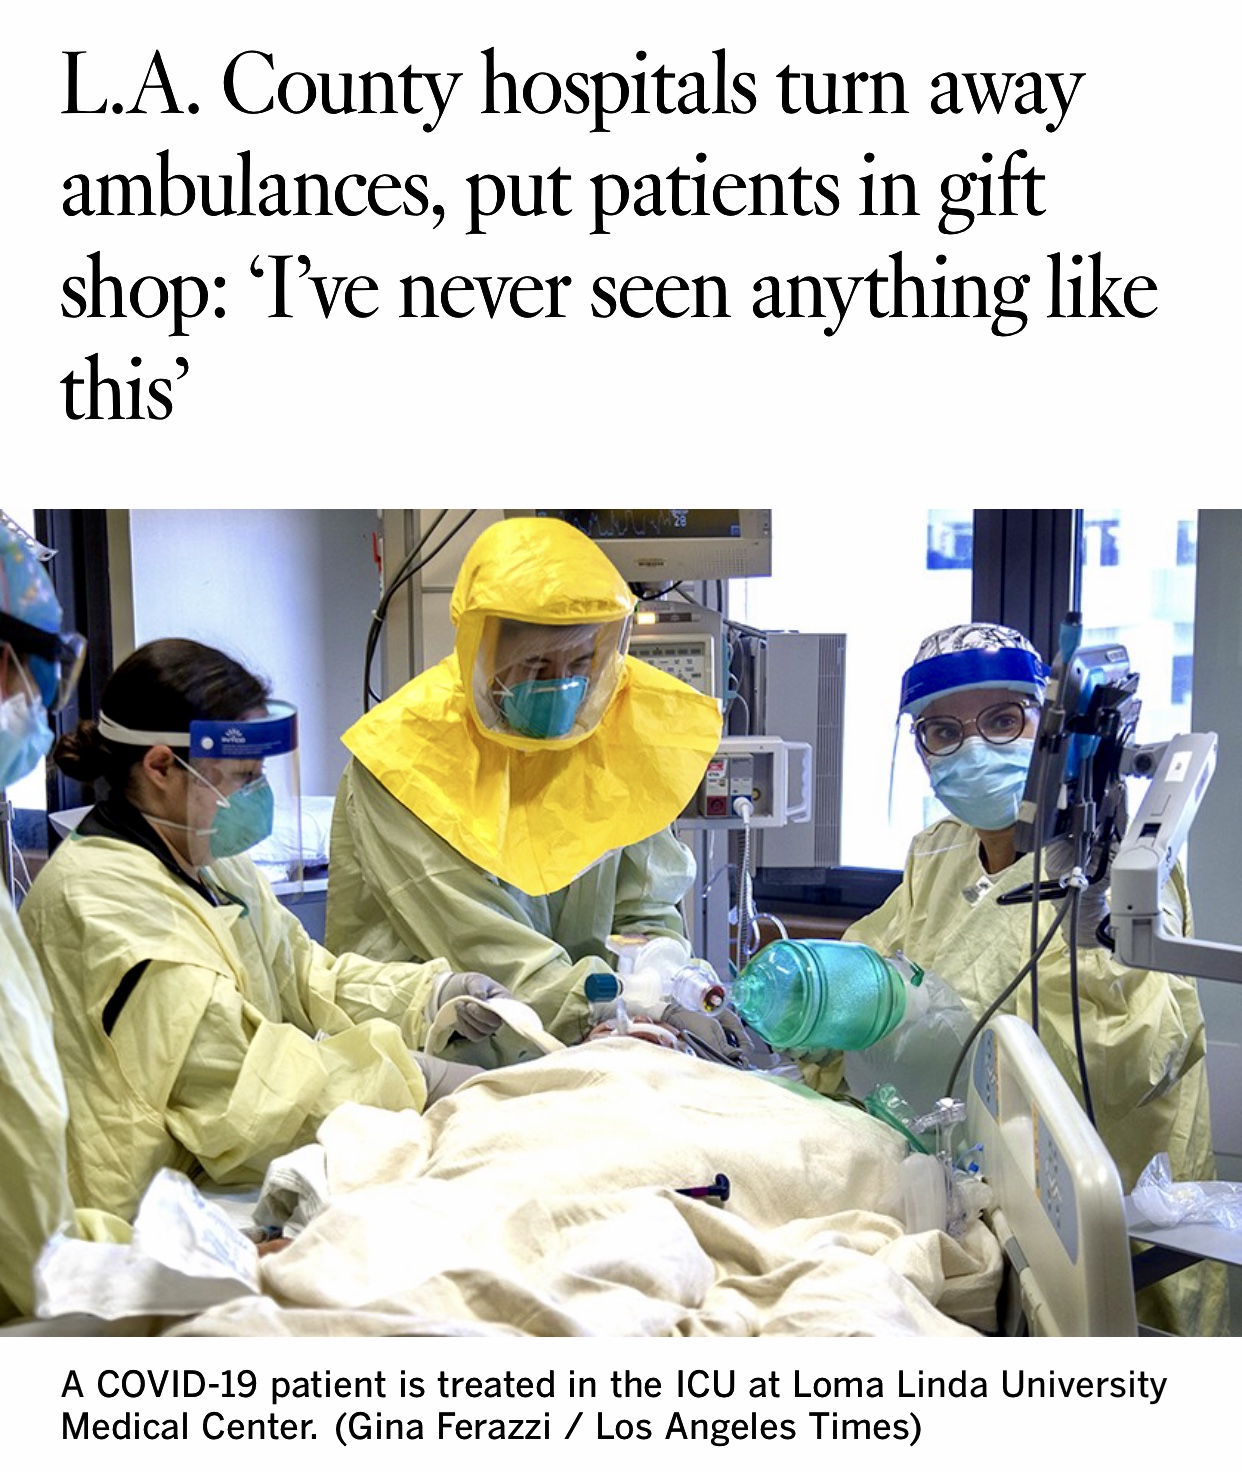 Breaking News L.A. County hospitals turn away ambulances, put patients in gift shop: ‘I’ve never seen anything like this’